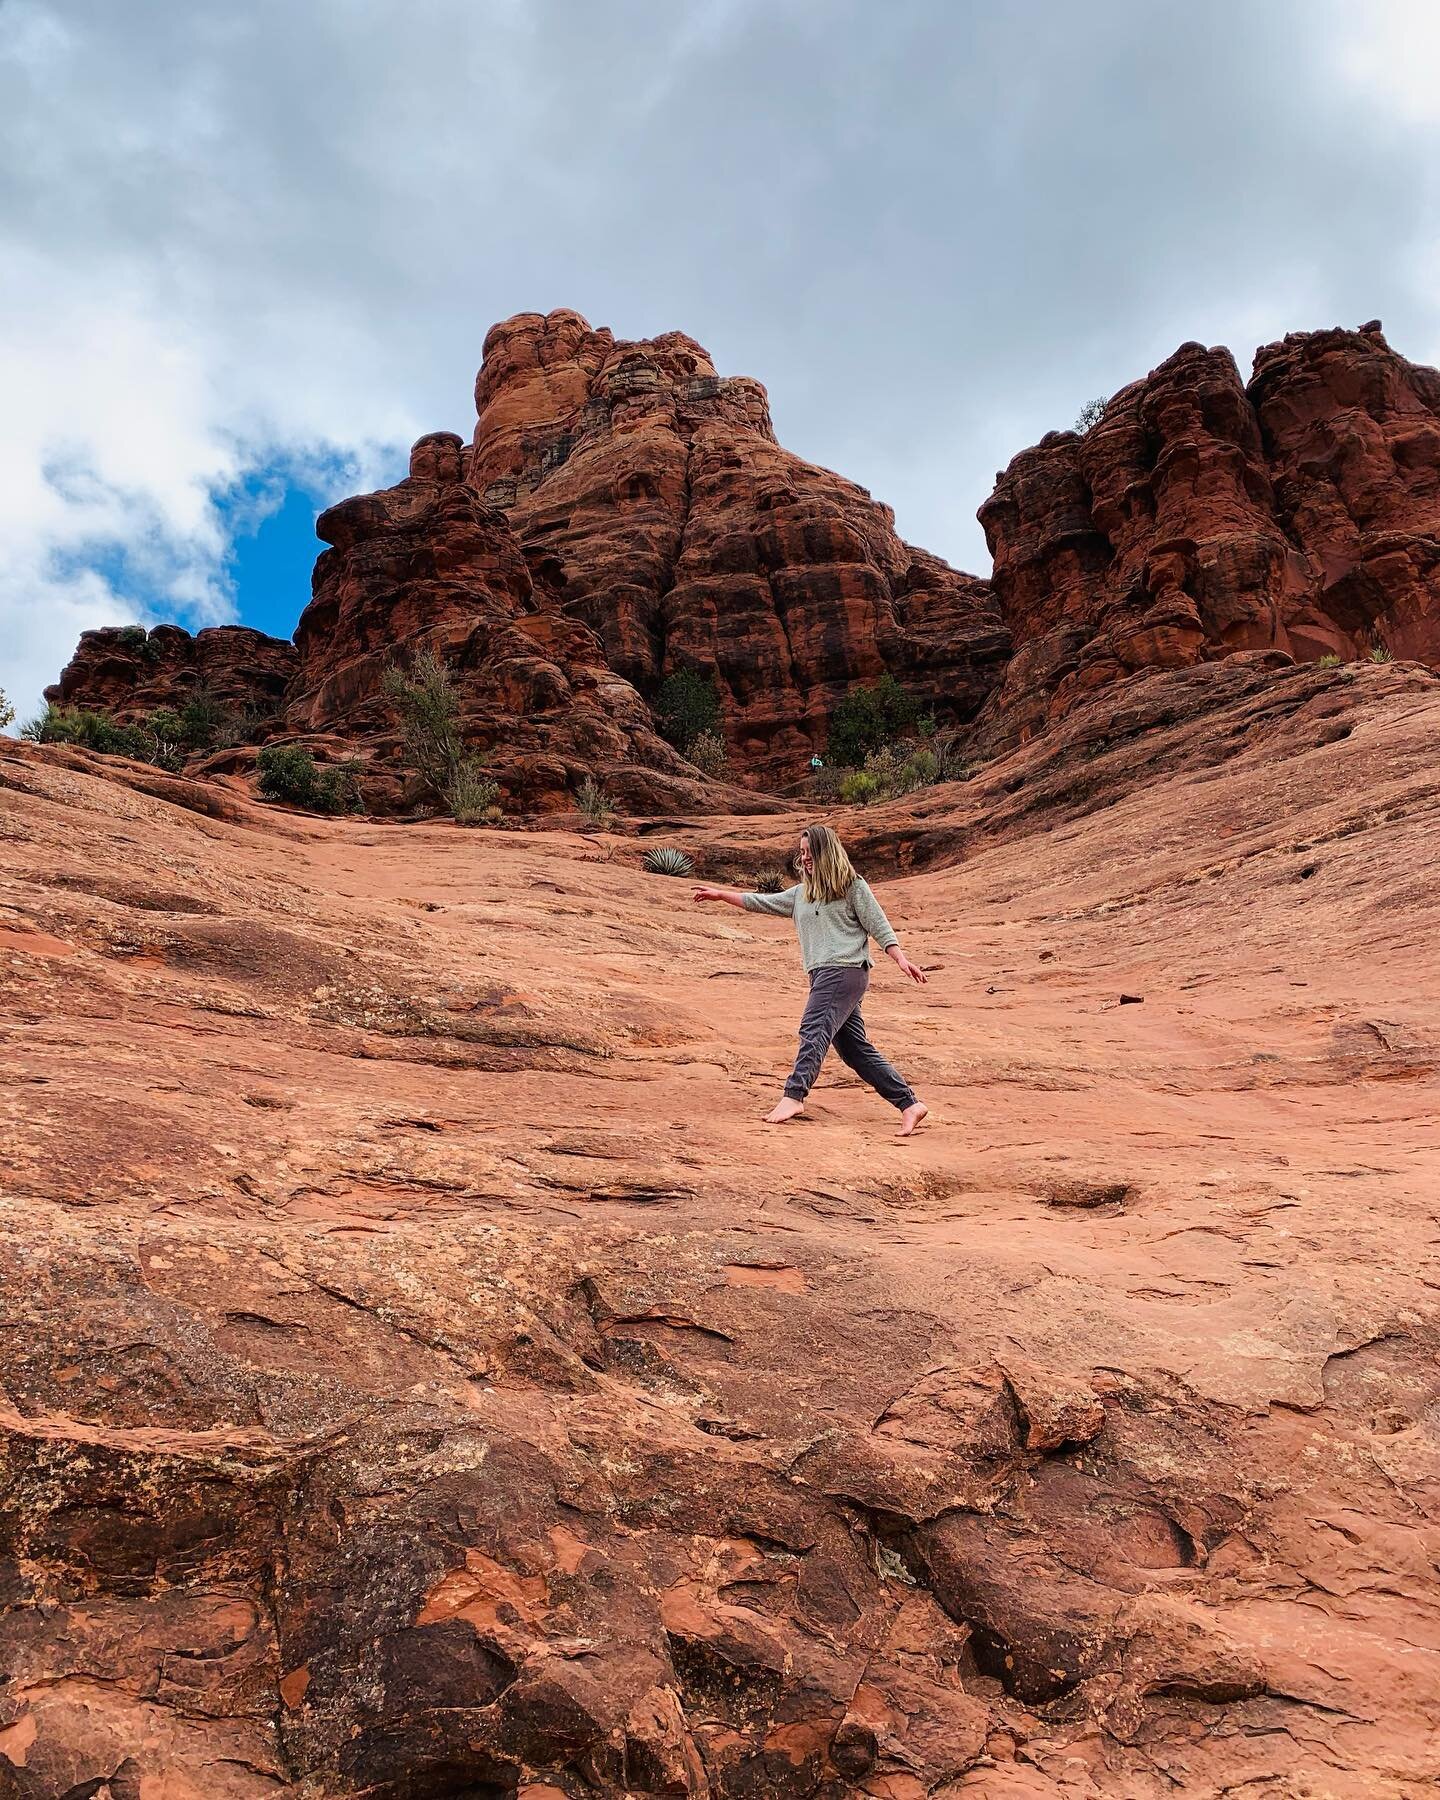 Feet still slightly stained red from Sedona.🌵If you&rsquo;ve never run barefoot on giant rocks I recommend it. Holding the moments experienced at this vortex near and dear. ❤️
#sedona #sedonaarizona #bellrock #arizona #vortex #sedonavortex #energy #